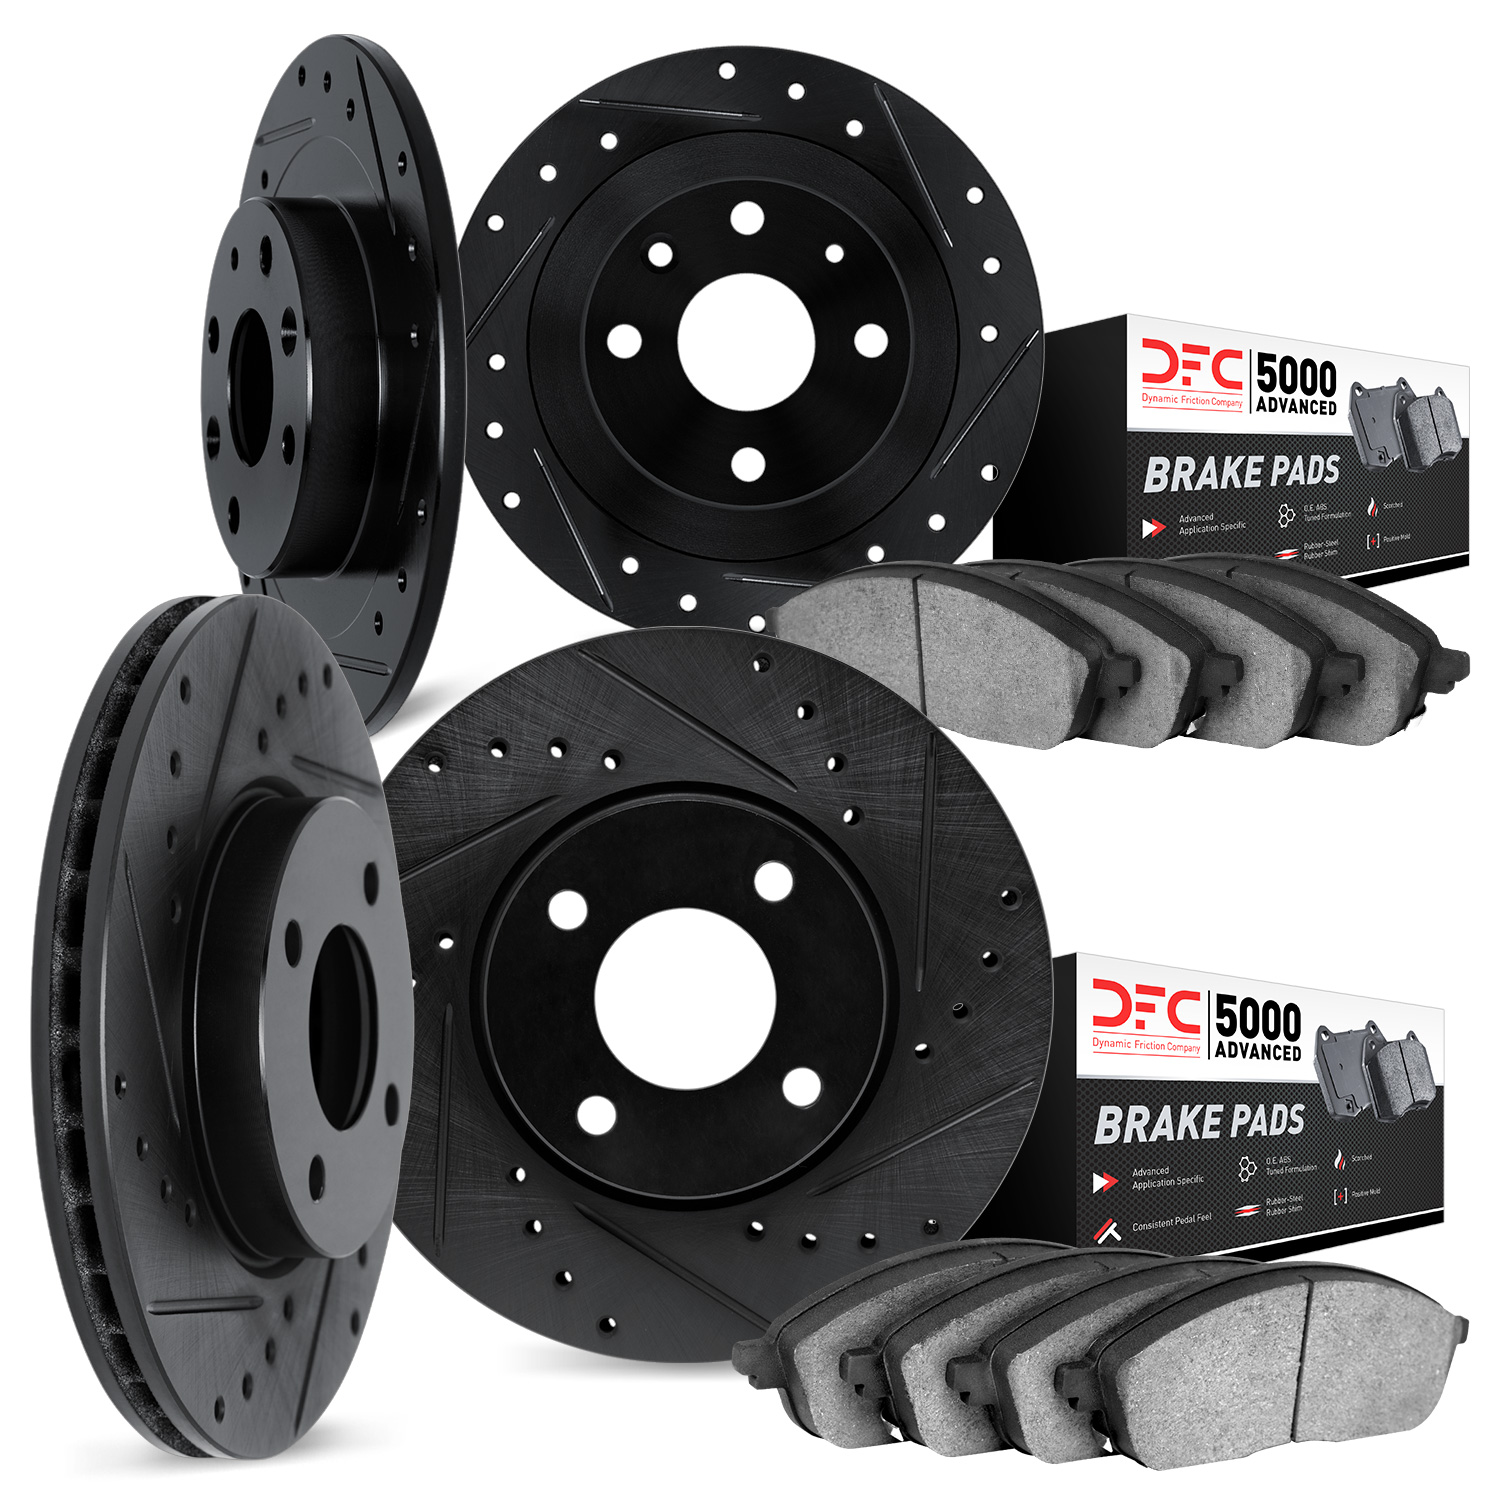 8504-59039 Drilled/Slotted Brake Rotors w/5000 Advanced Brake Pads Kit [Black], 1984-1987 Acura/Honda, Position: Front and Rear